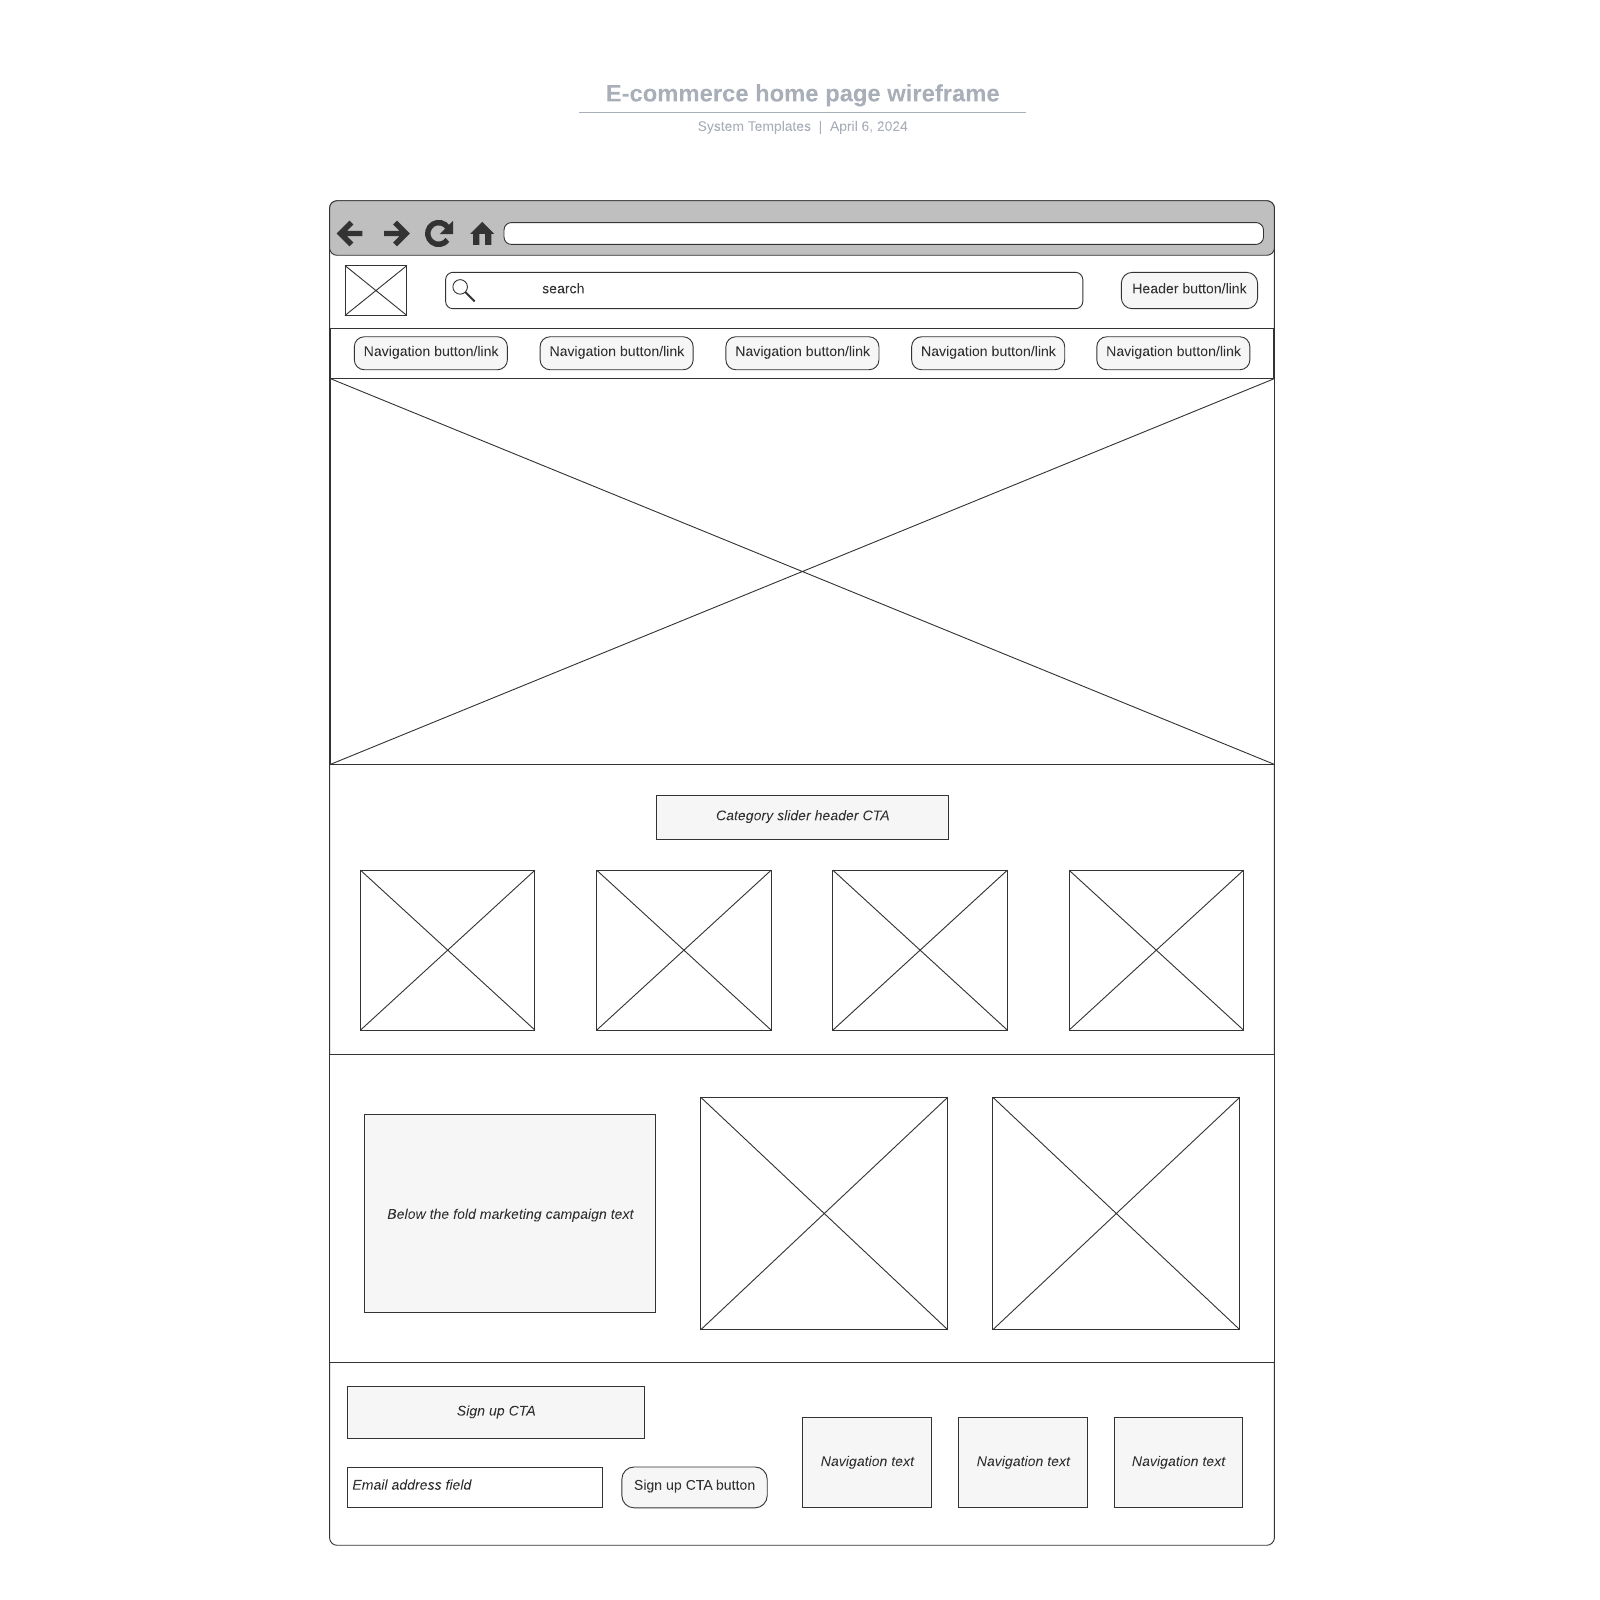 E-commerce home page wireframe example